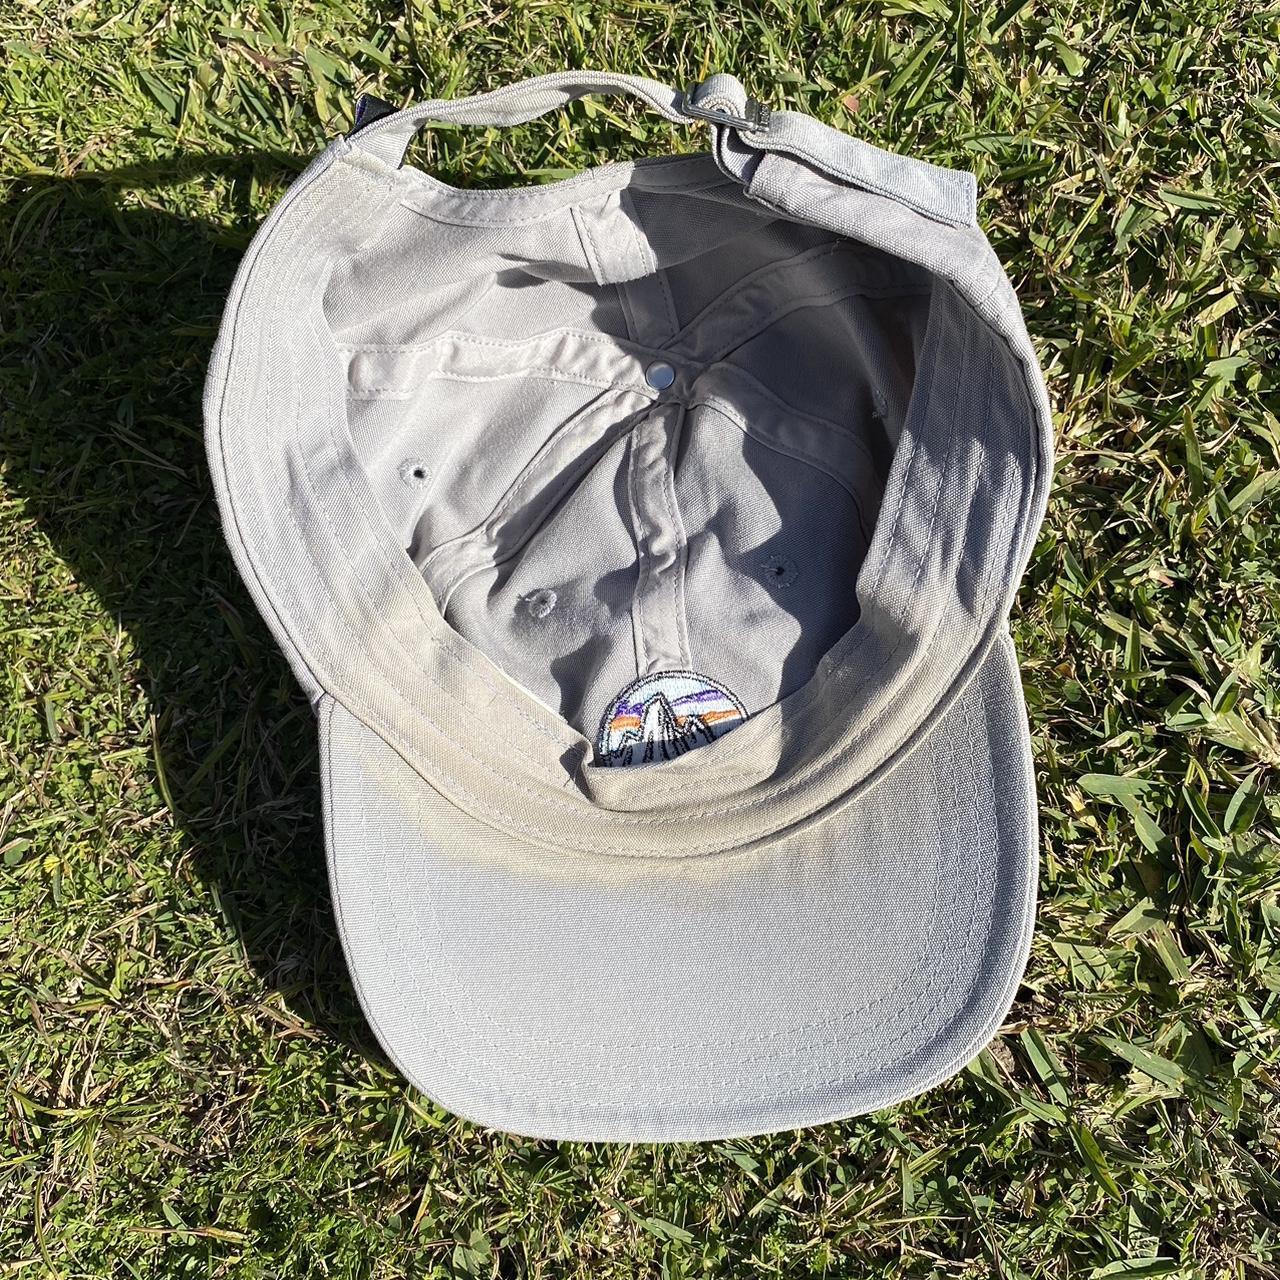 Vintage Patagonia hat., Size fits all